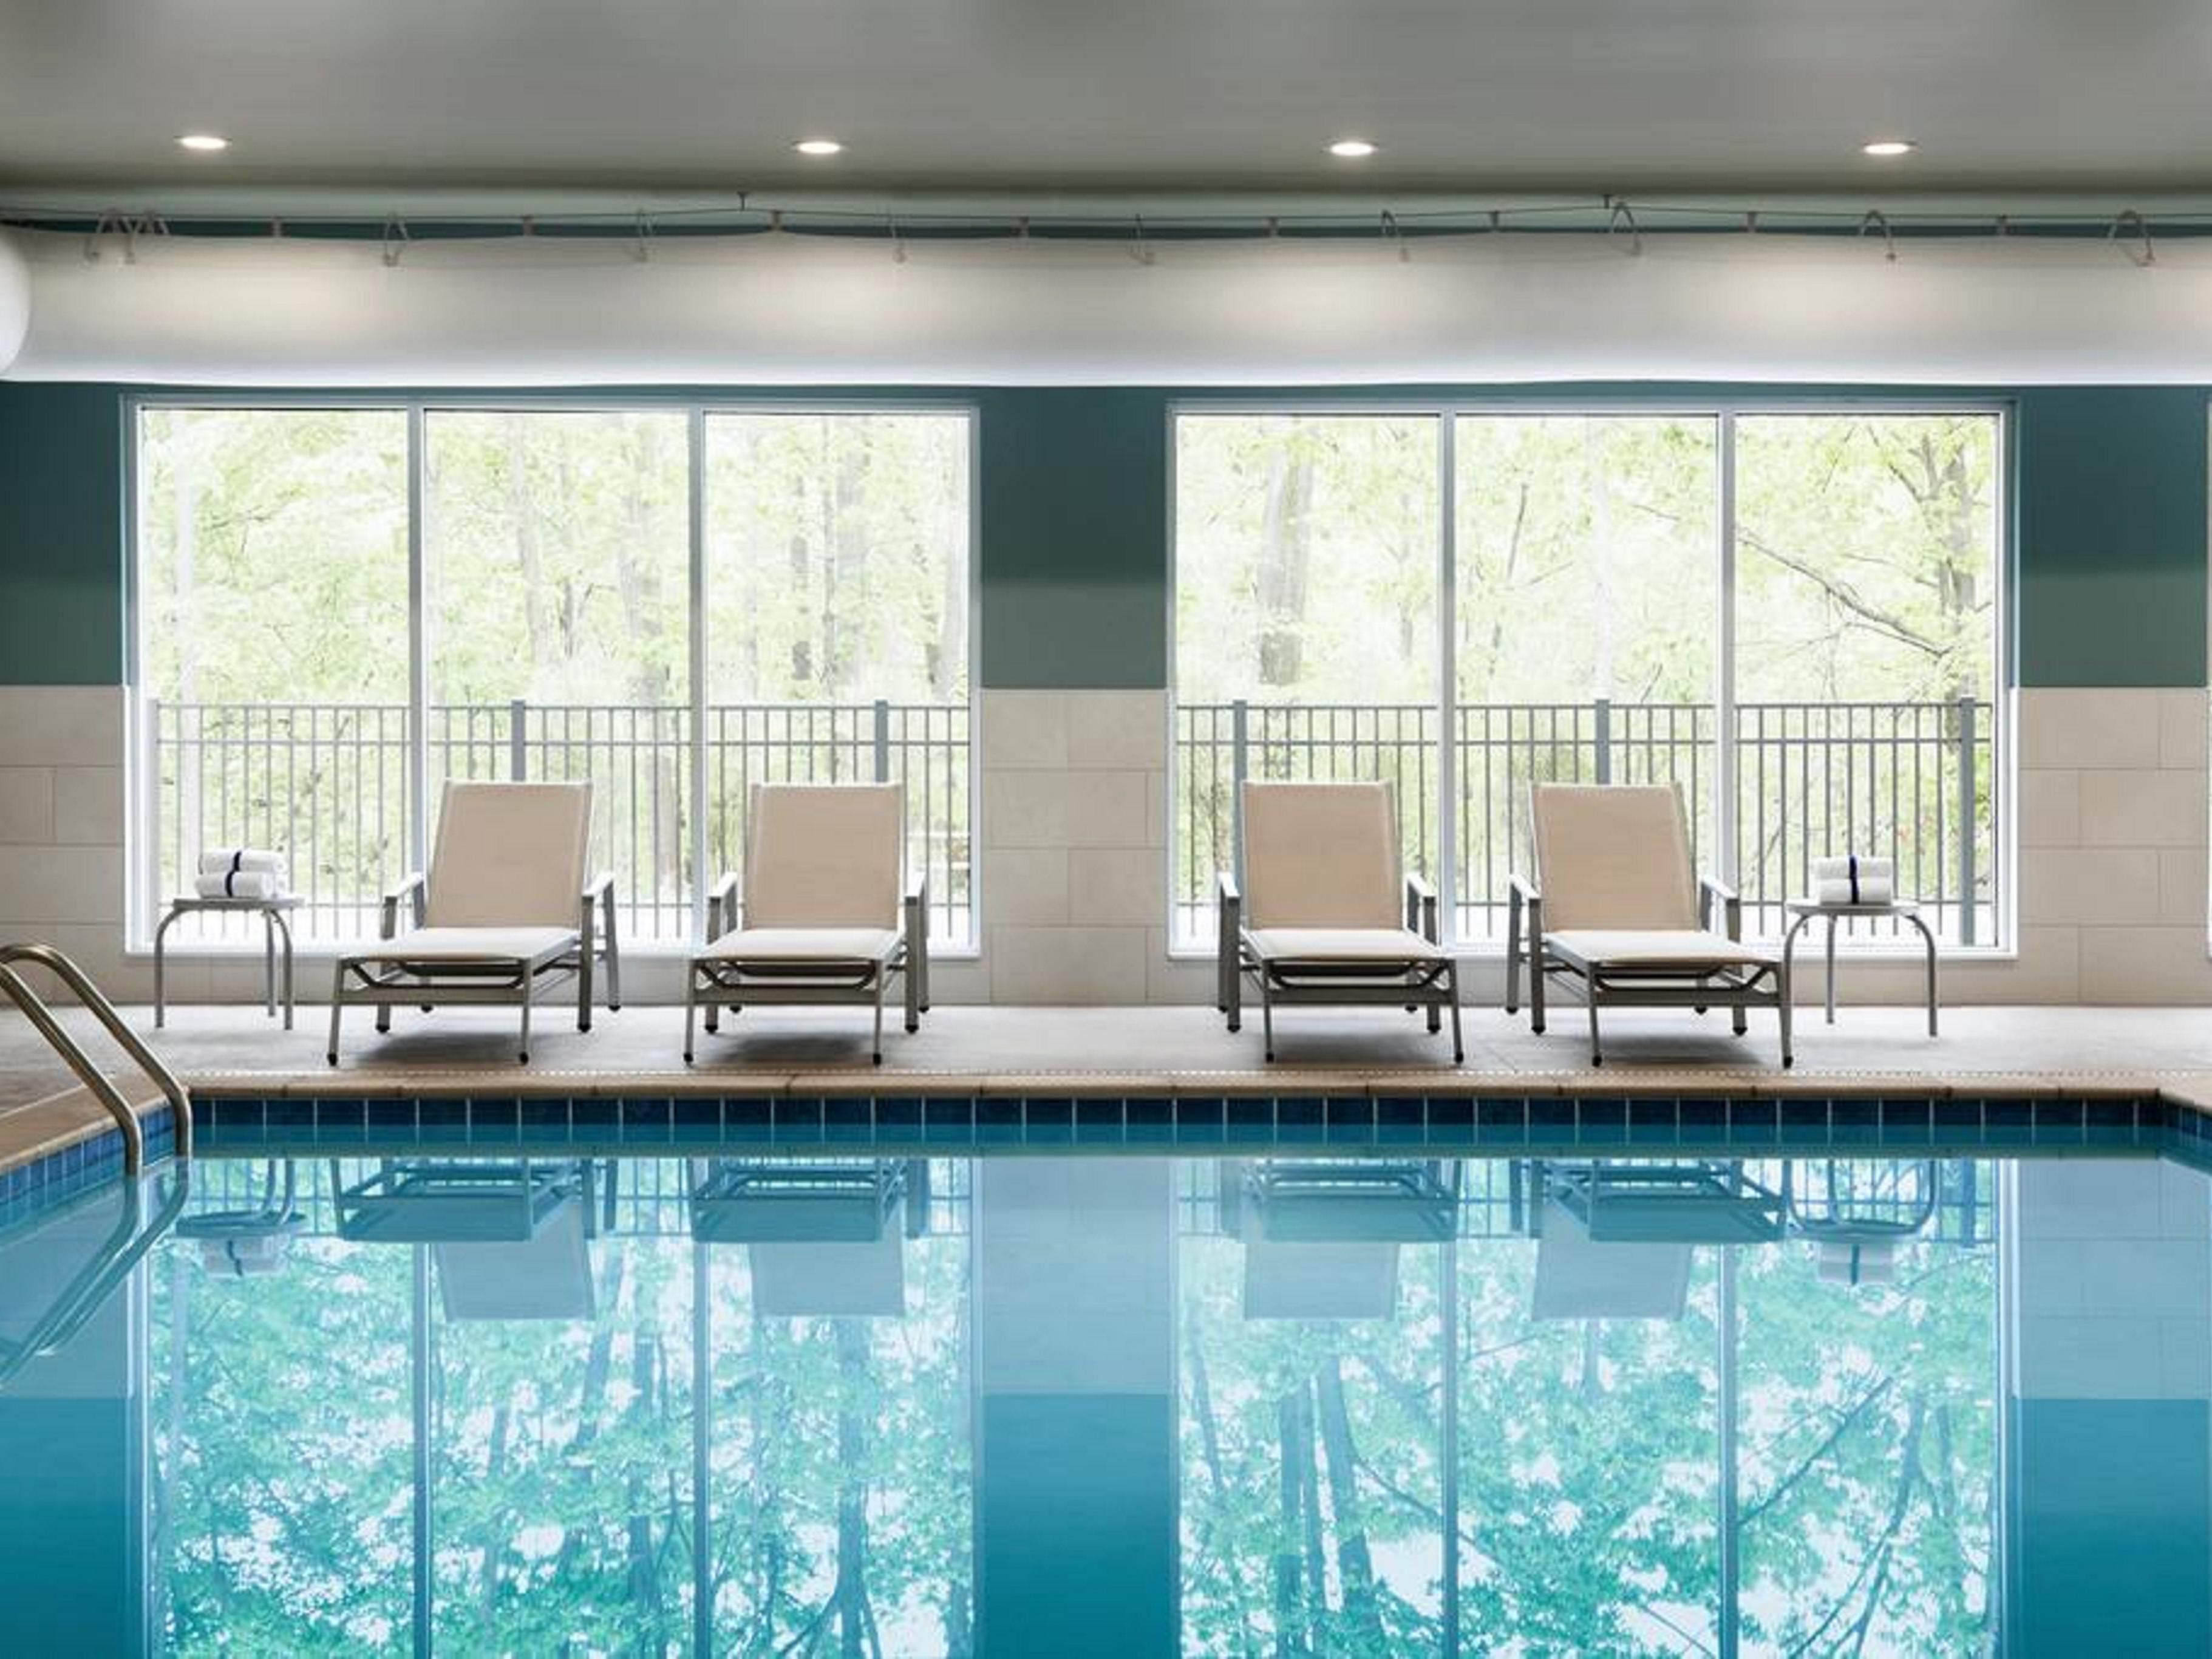 Sunshine, rain or snow, our refreshing indoor heated pool is open year round.